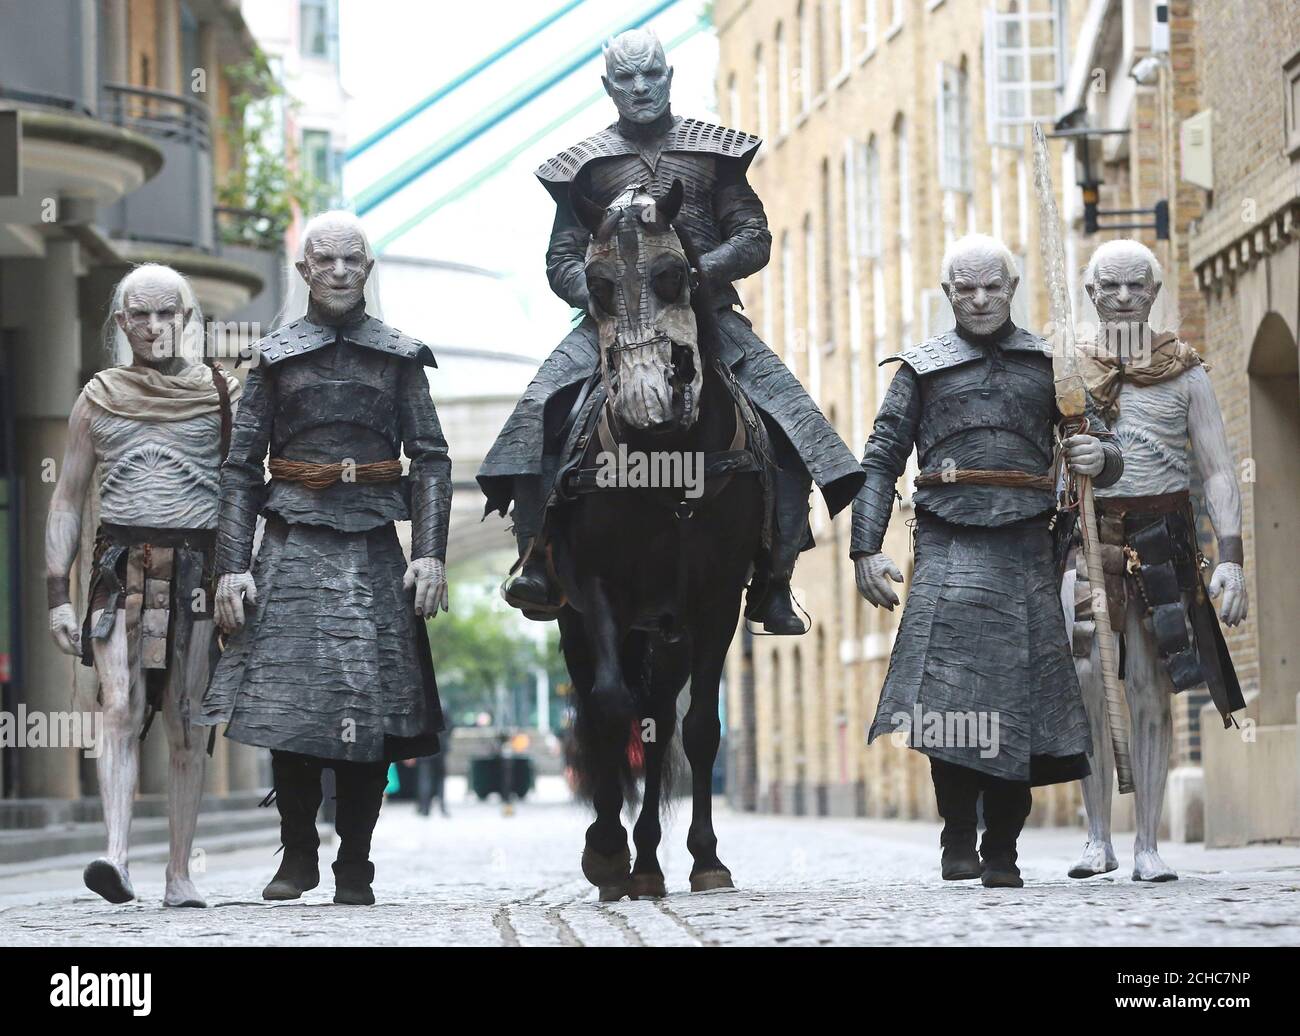 EDITORIAL USE ONLY Five models dressed as &Ocirc;White Walkers&Otilde; from Game of Thrones, led by the &Ocirc;Night King&Otilde; on horseback, pass by Tower Bridge in London to celebrate the upcoming start of season 7 of the television show, which airs at 9pm on Monday July 17th on Sky Atlantic.  Stock Photo